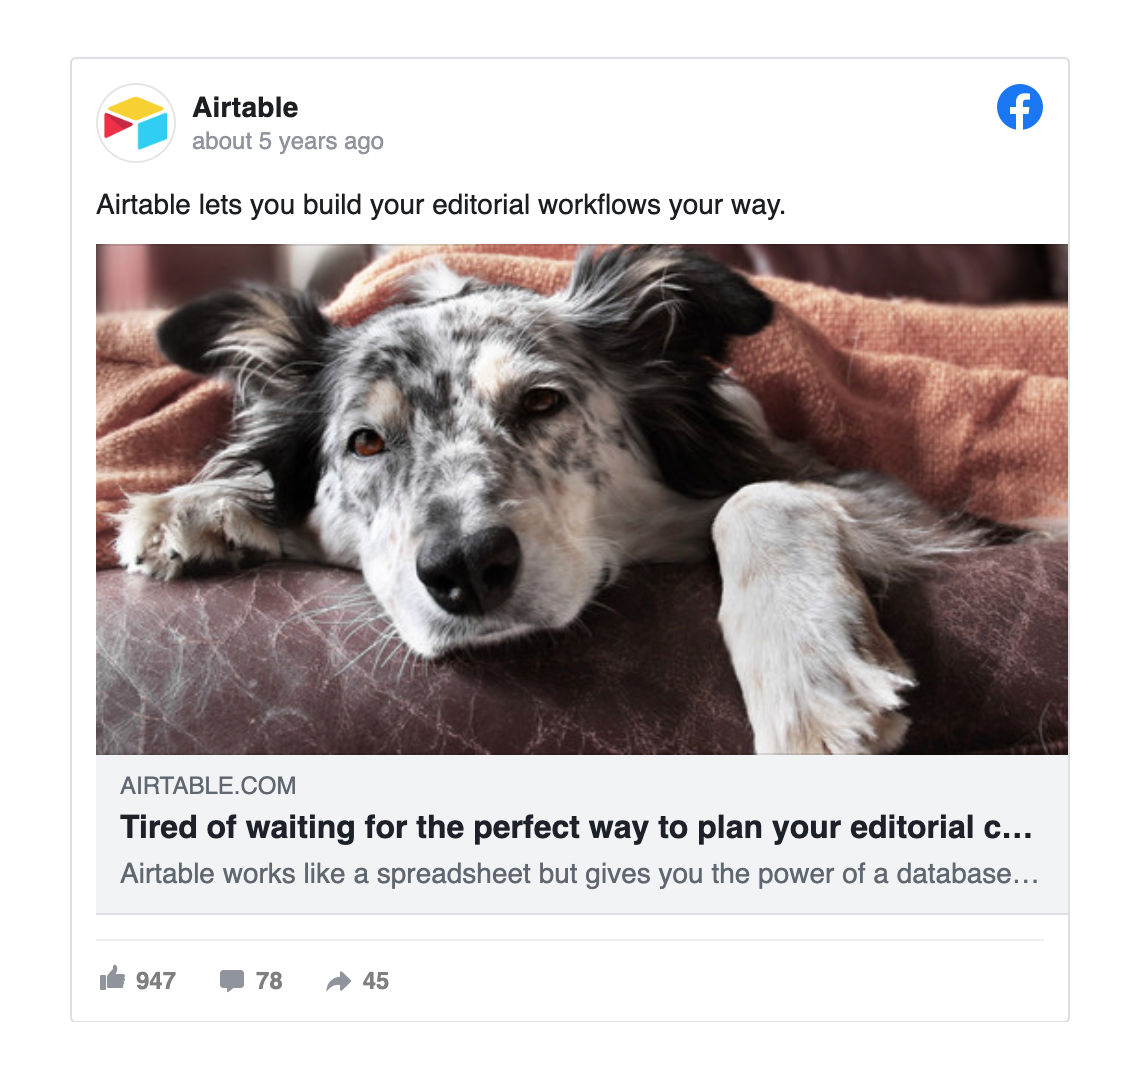 Facebook Image Ads examples